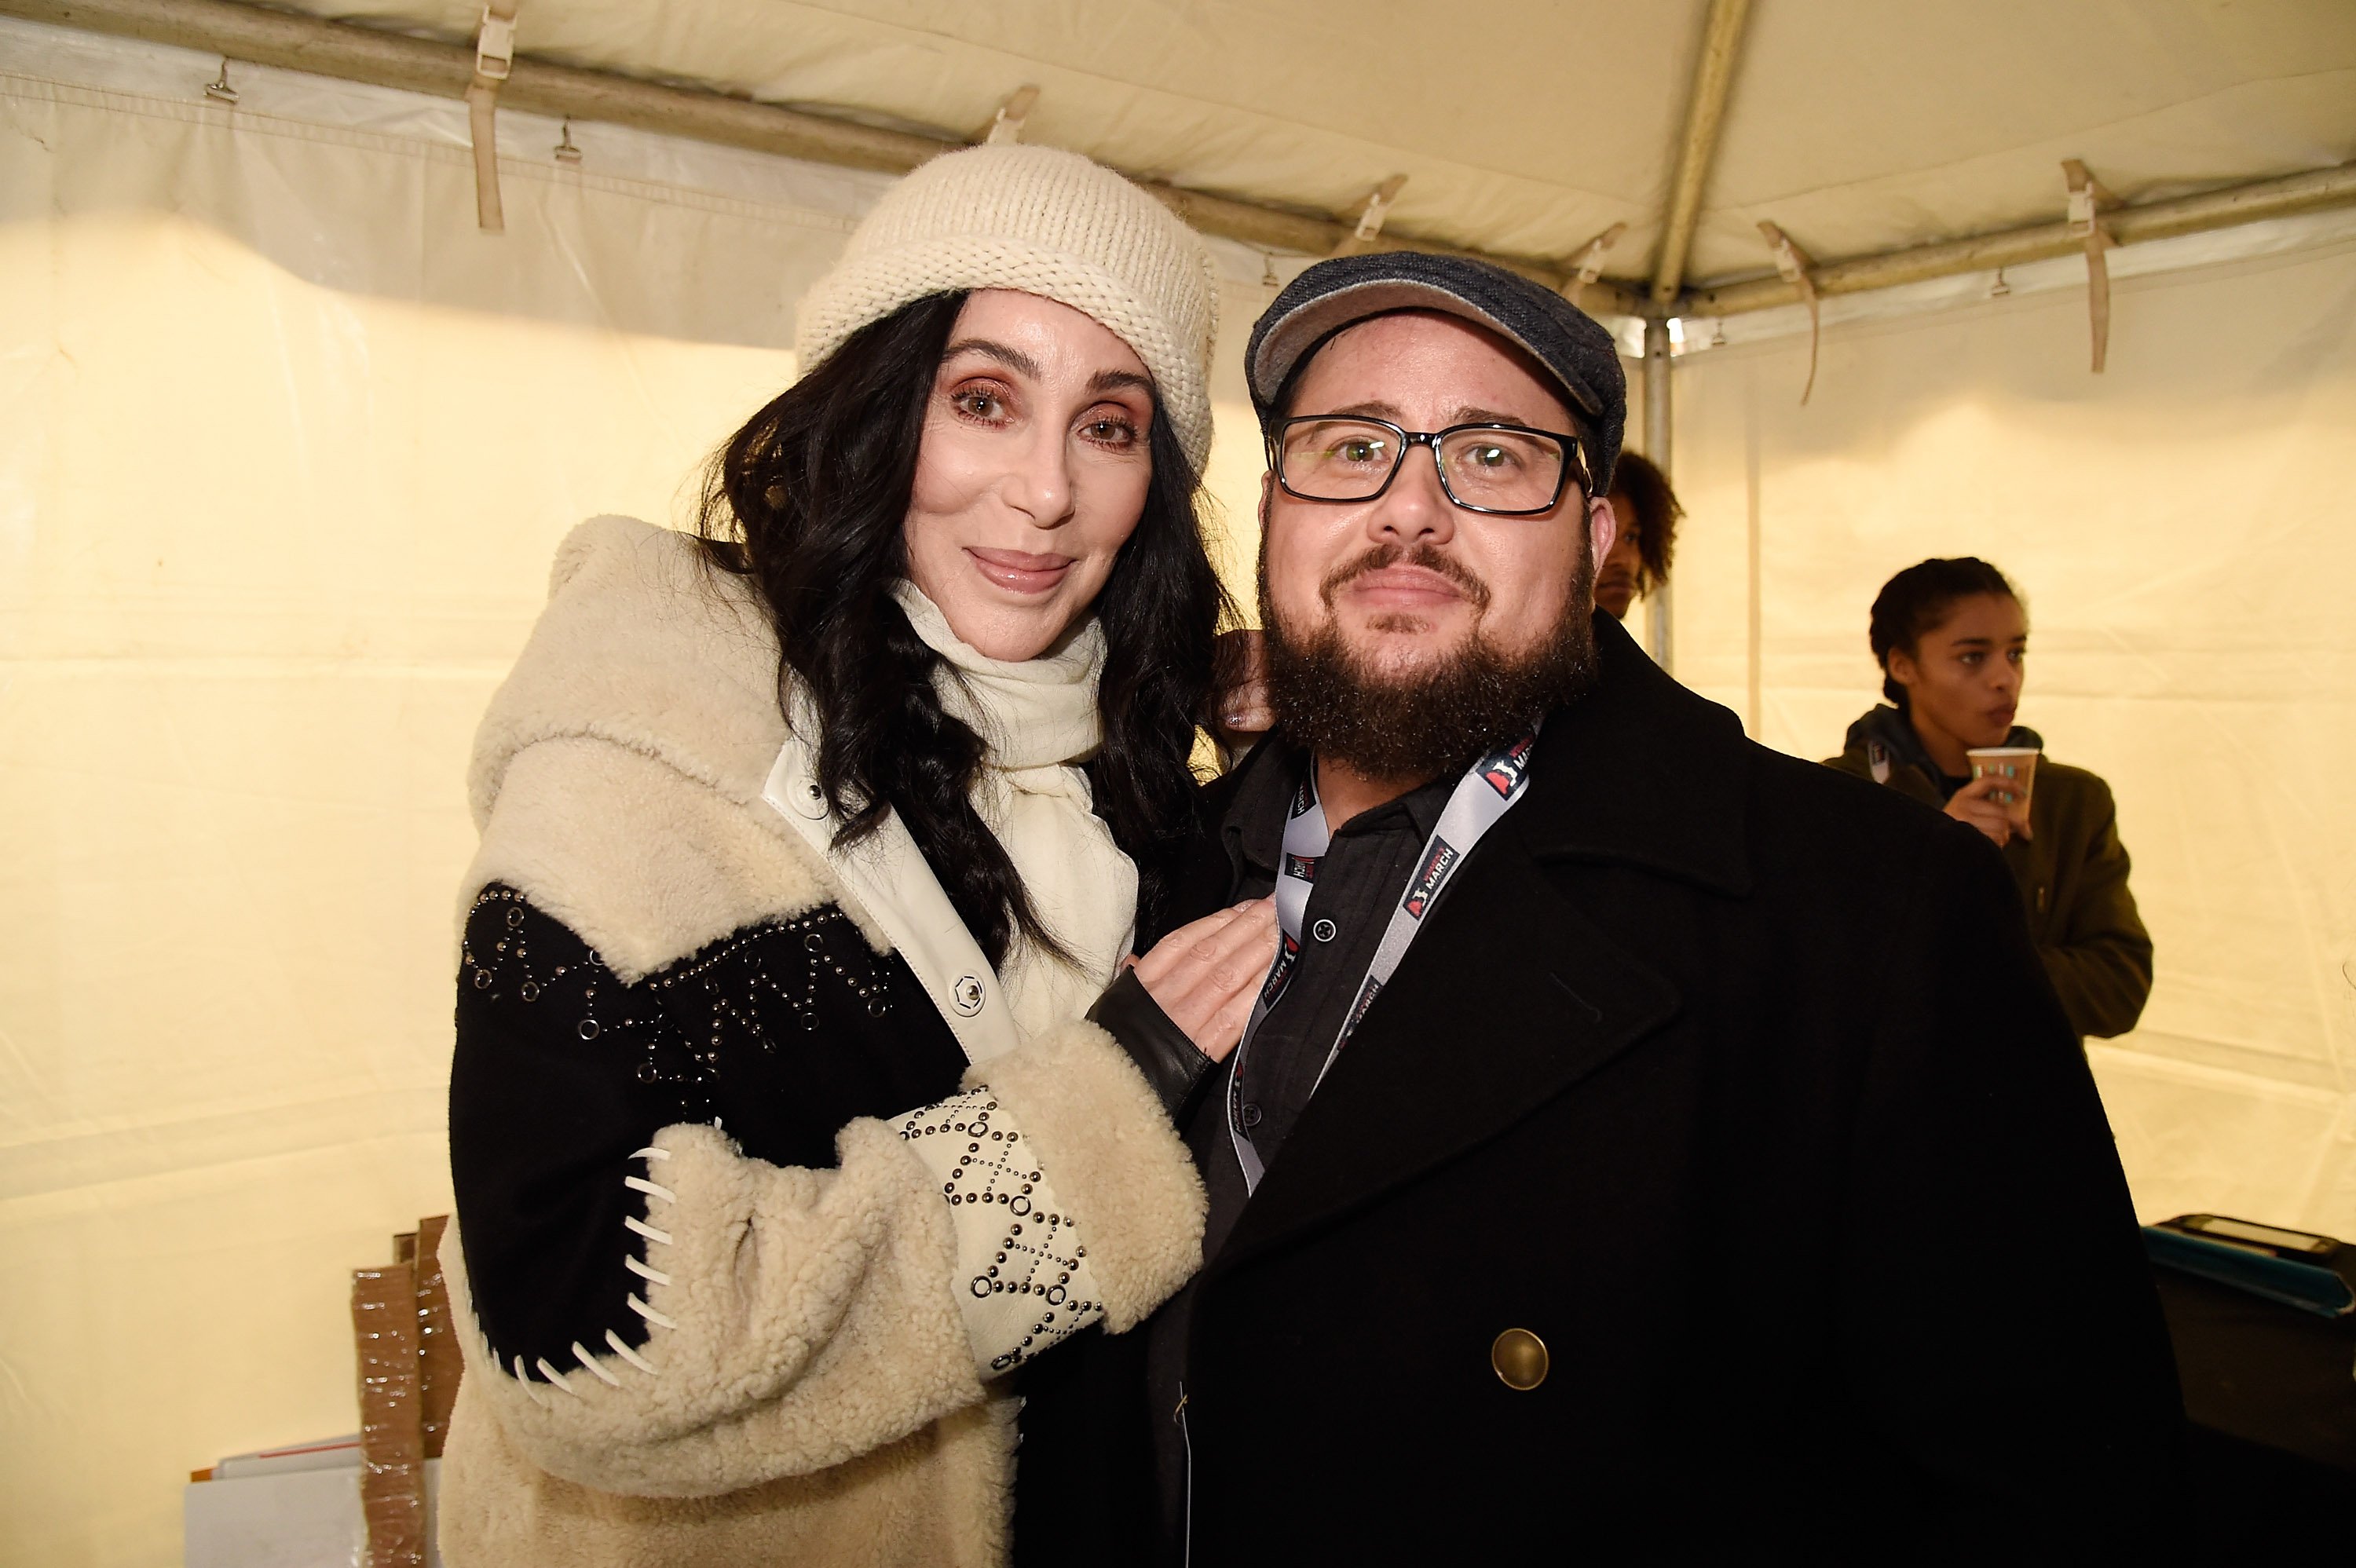 Cher and Chaz Bono attend the rally at the Women's March on Washington on January 21, 2017 in Washington, DC. | Source: Getty Images